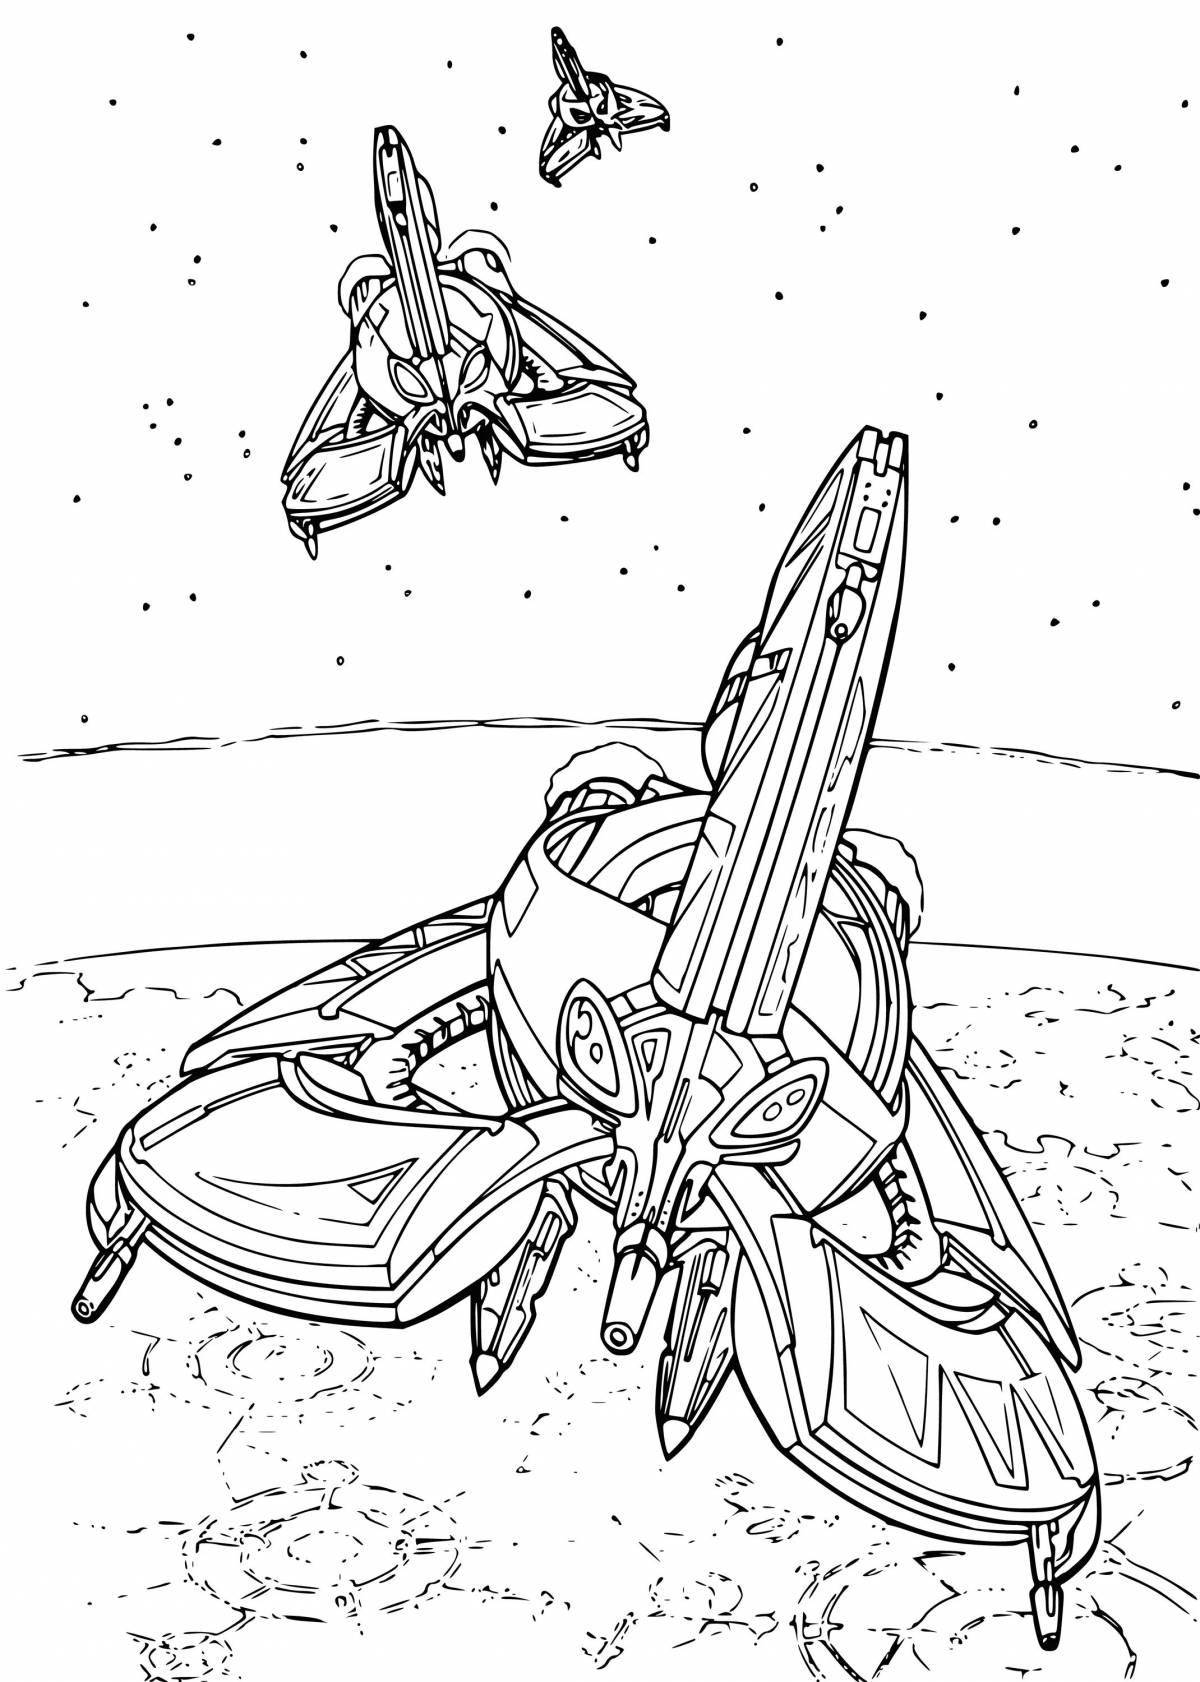 Space wars coloring page